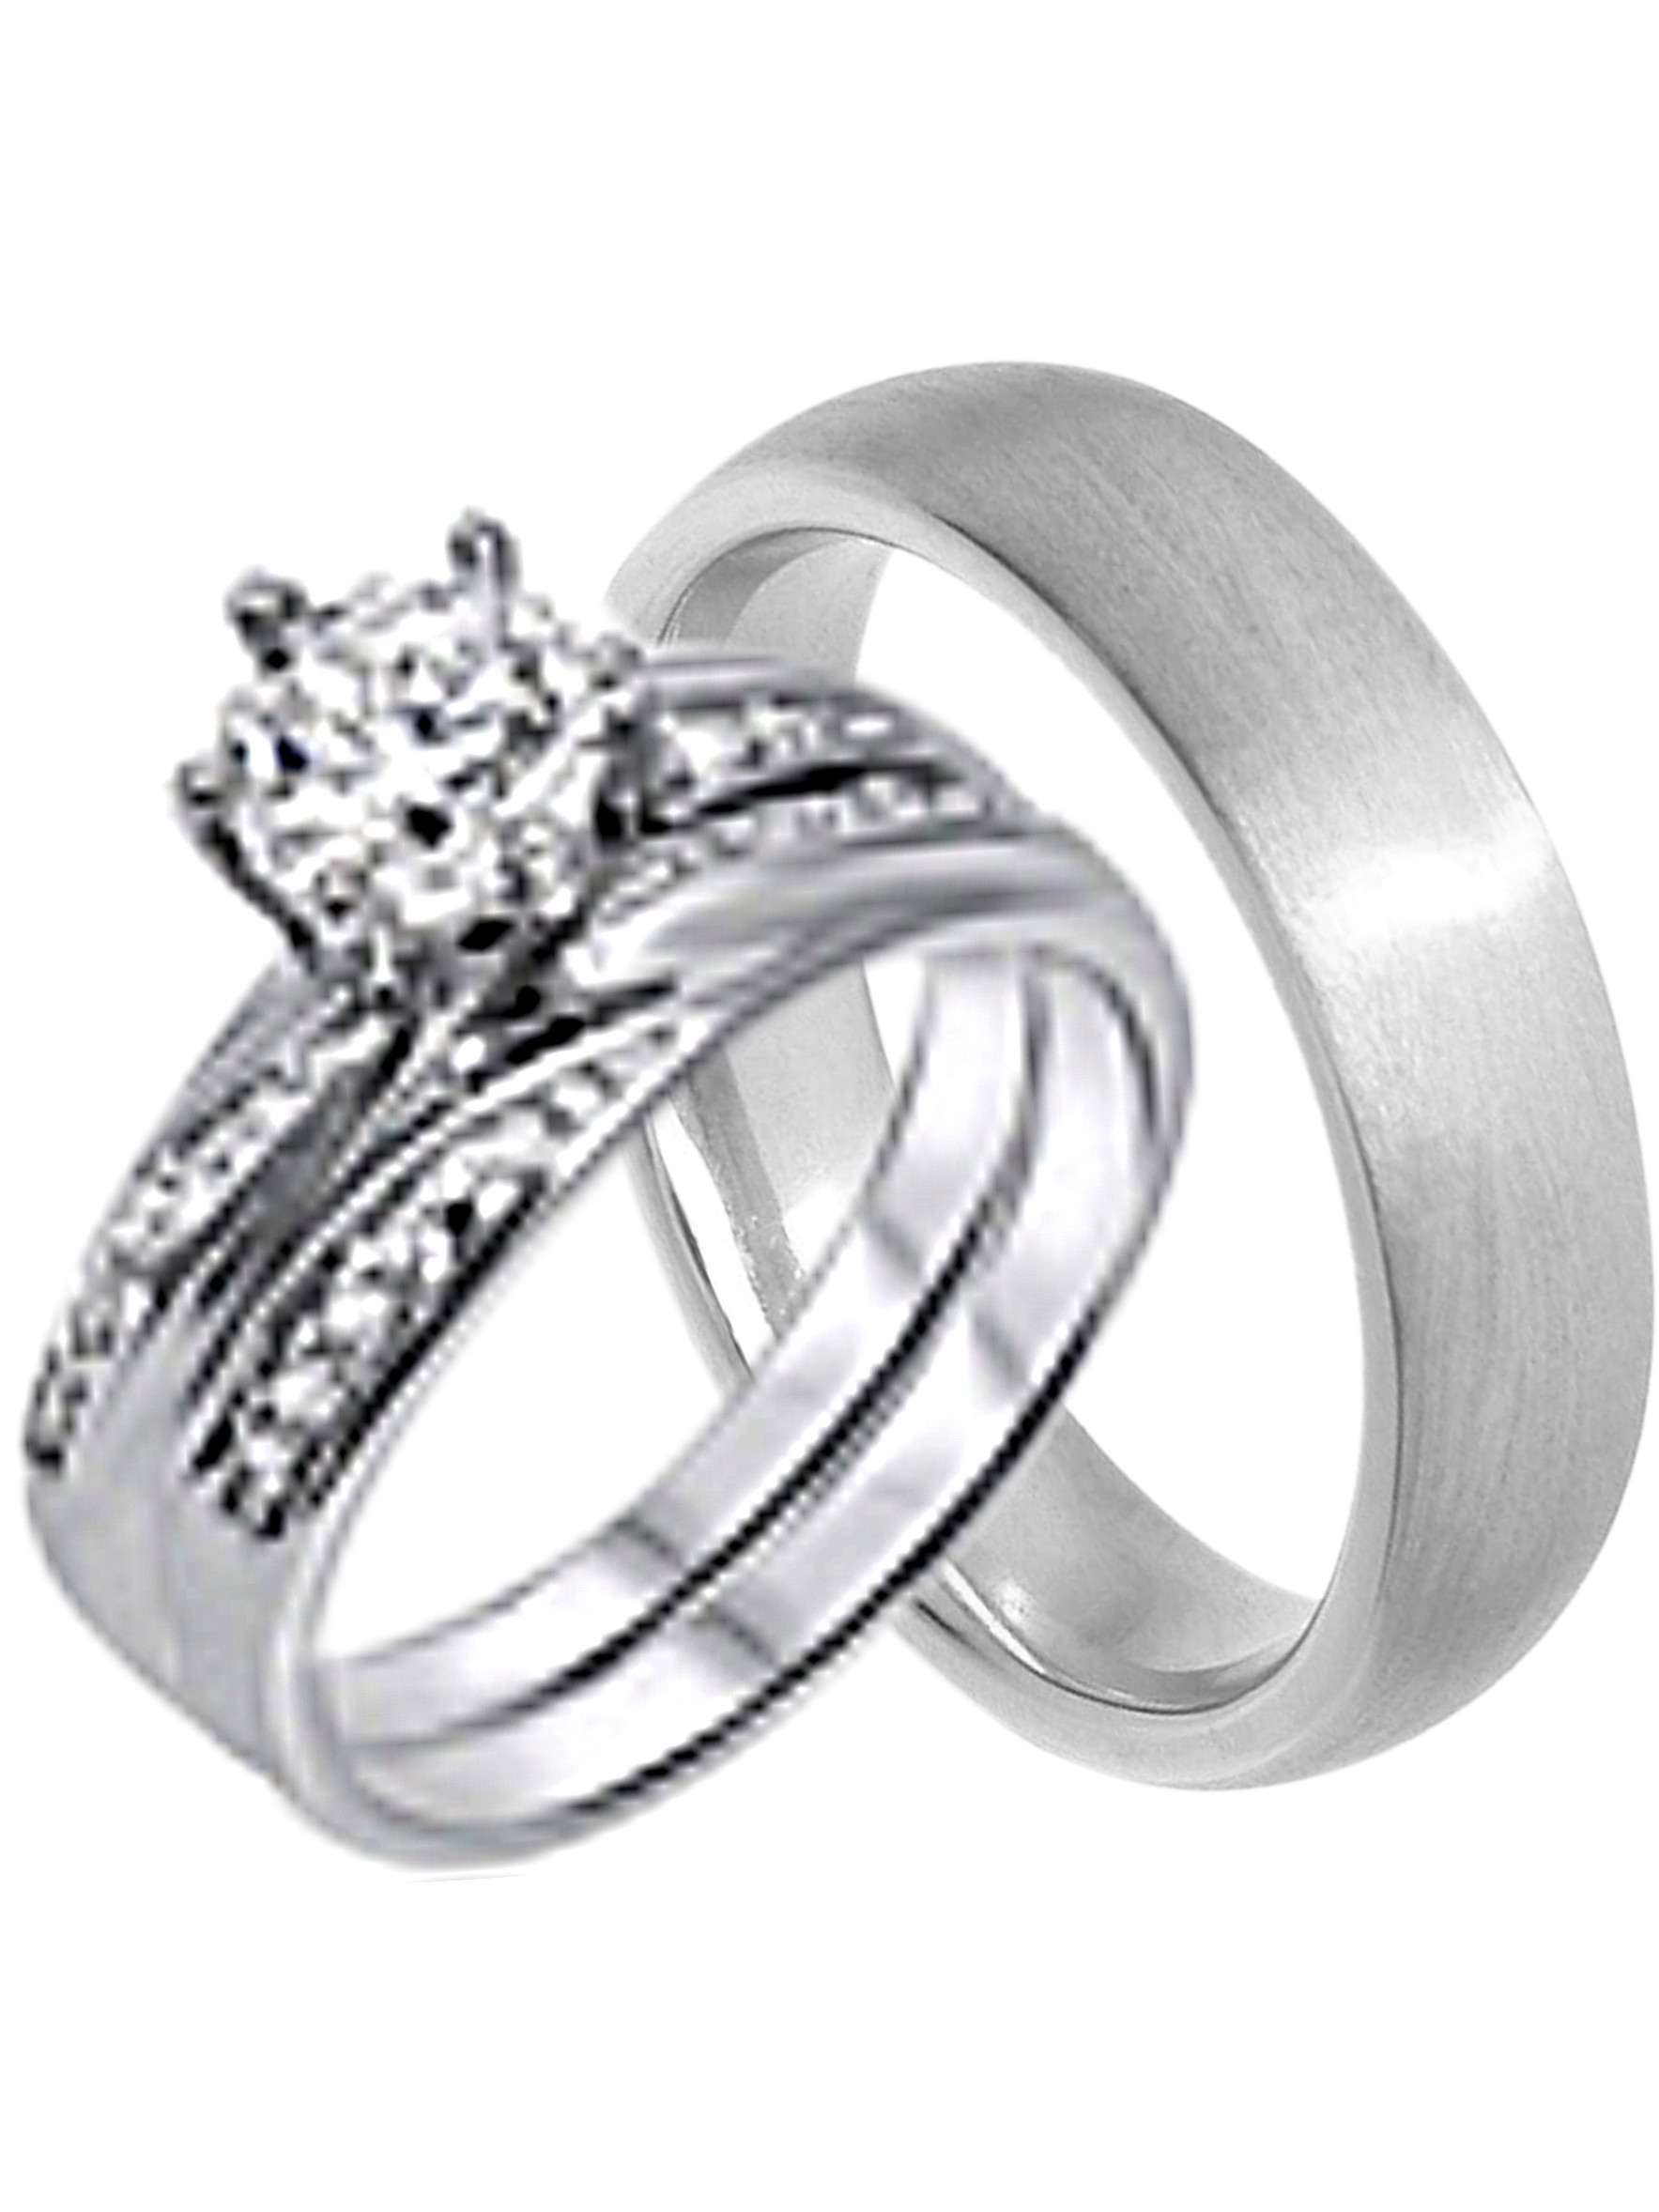 Wedding Rings Sets For Him And Her Cheap
 His and Hers Wedding Ring Set Cheap Wedding Bands for Him